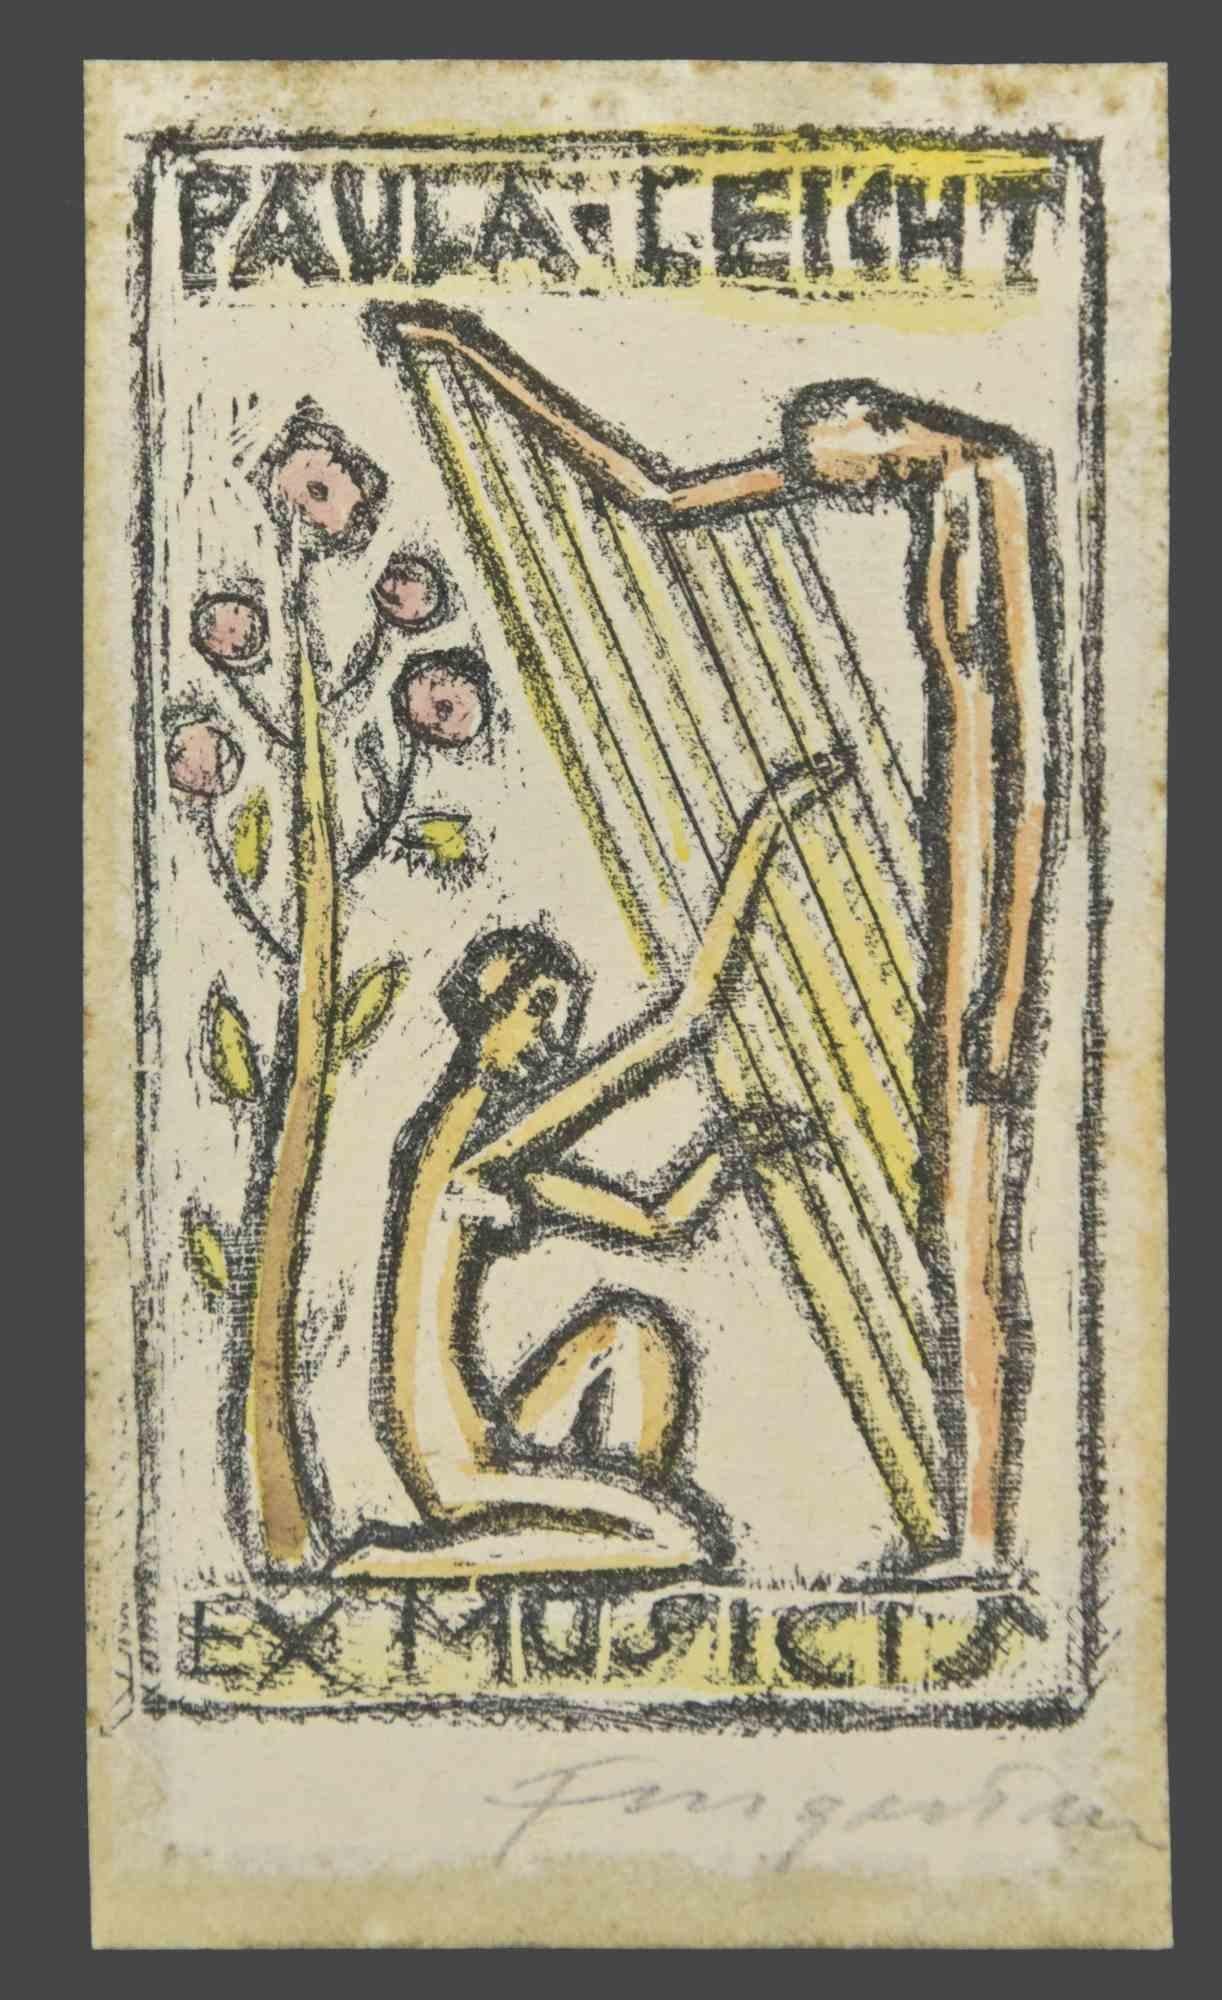 Ex Libris - Ex Musicis is a colored woodcut print created by  Michel Fingesten.

Hand Signed on   the lower right margin.

Good conditions.

Michel Fingesten (1884 - 1943) was a Czech painter and engraver of Jewish origin. He is considered one of